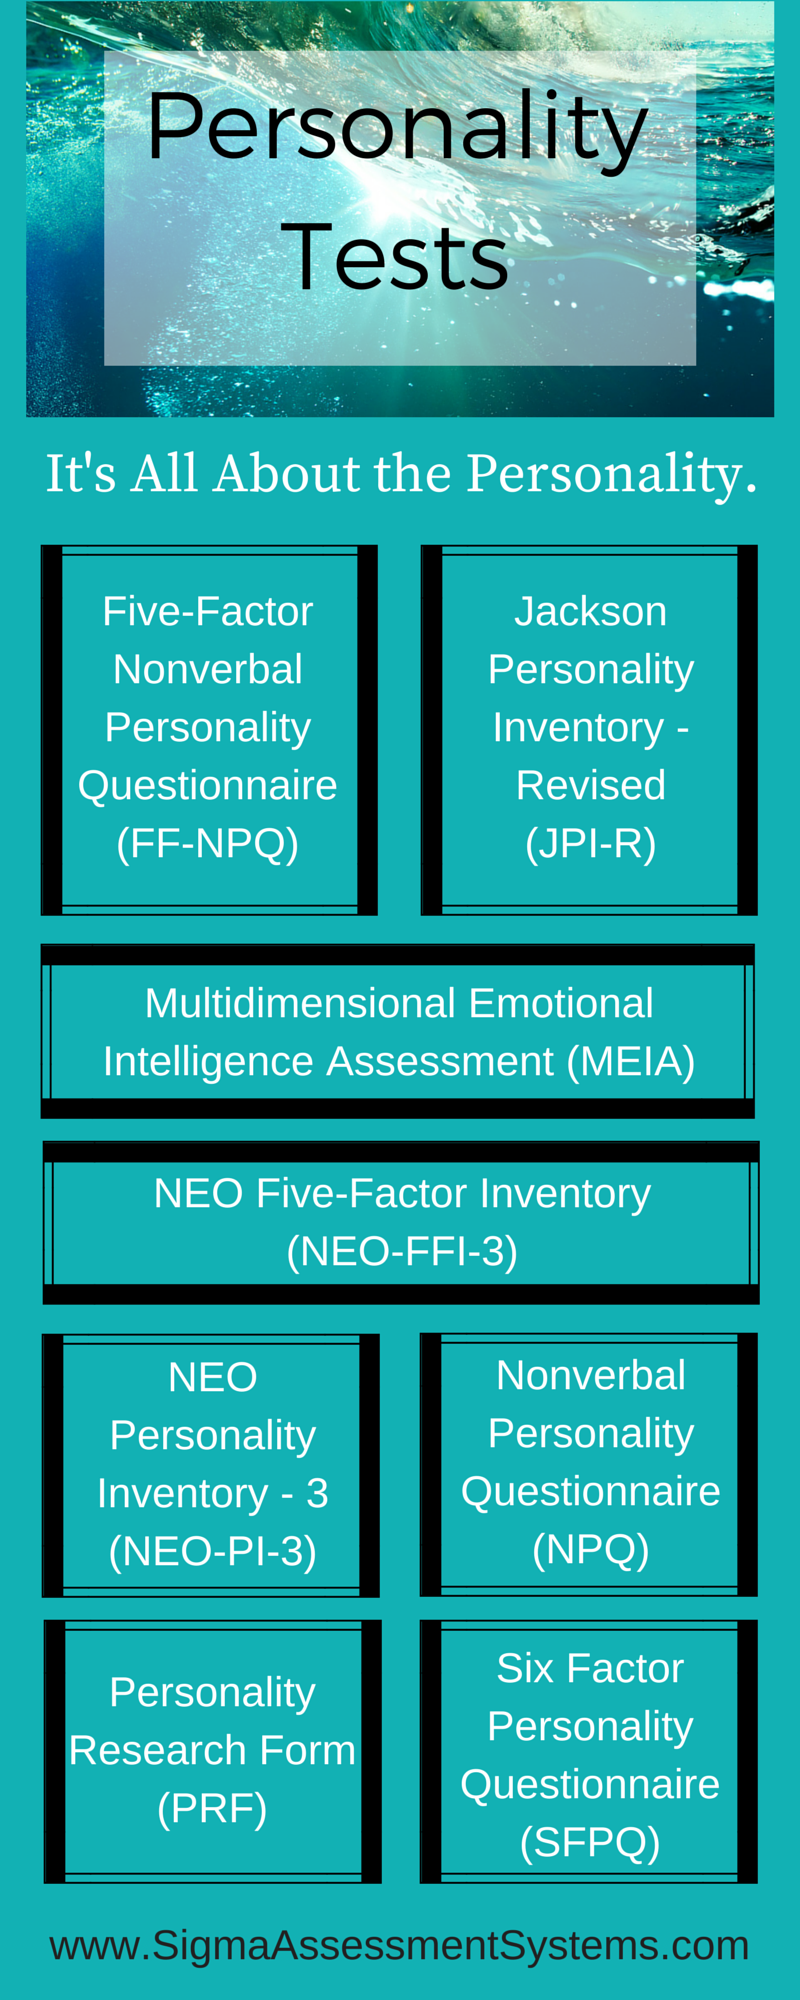 personality assessment inventory